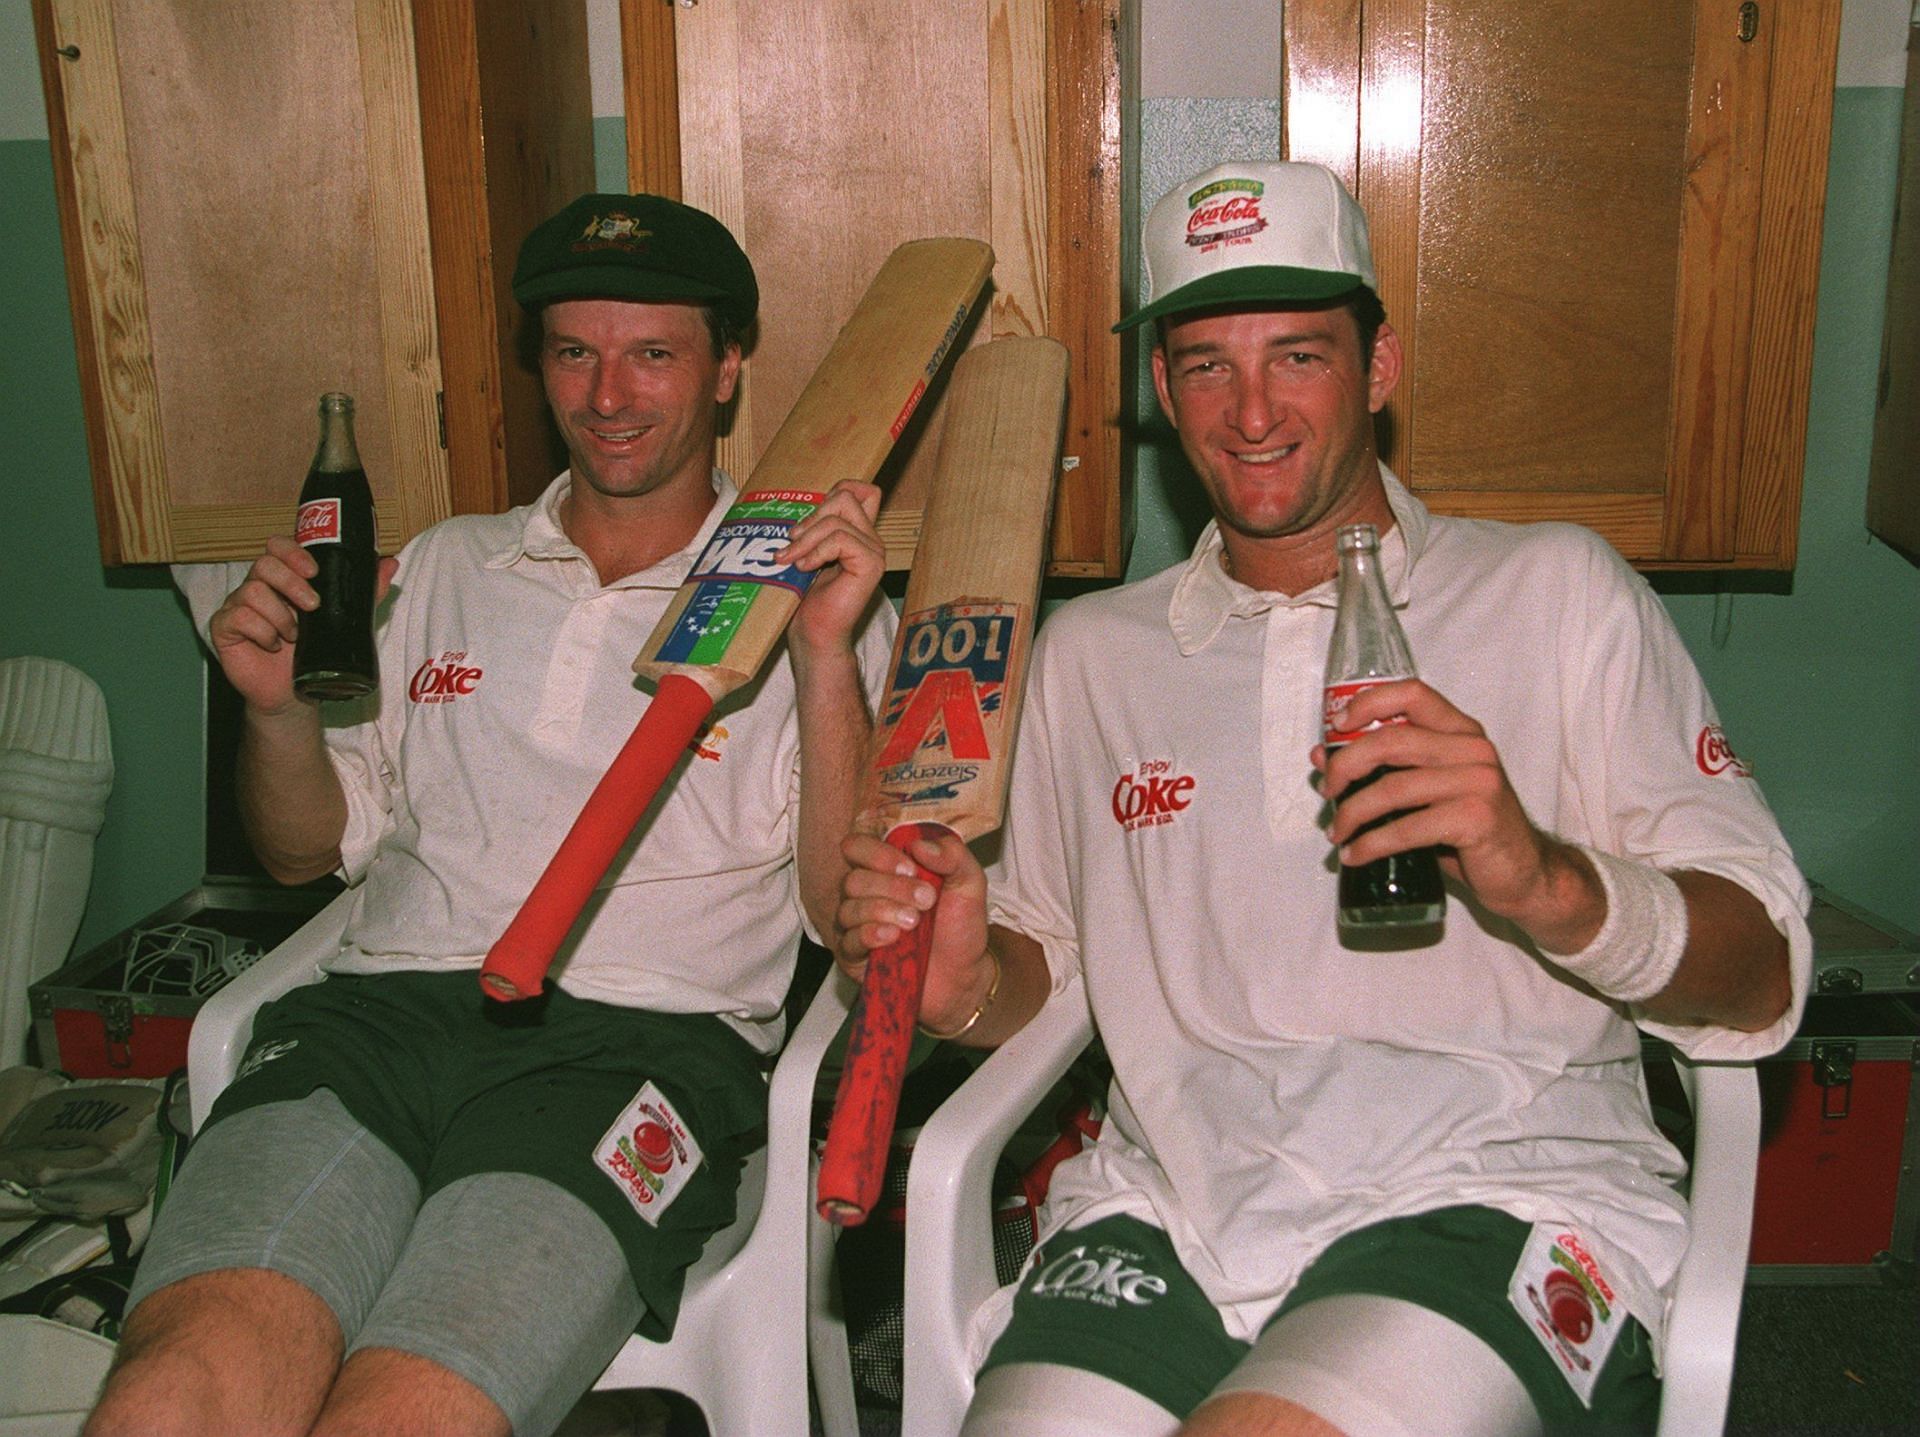 Steve Waugh and Mark Waugh in 1995. Pic: Getty Images